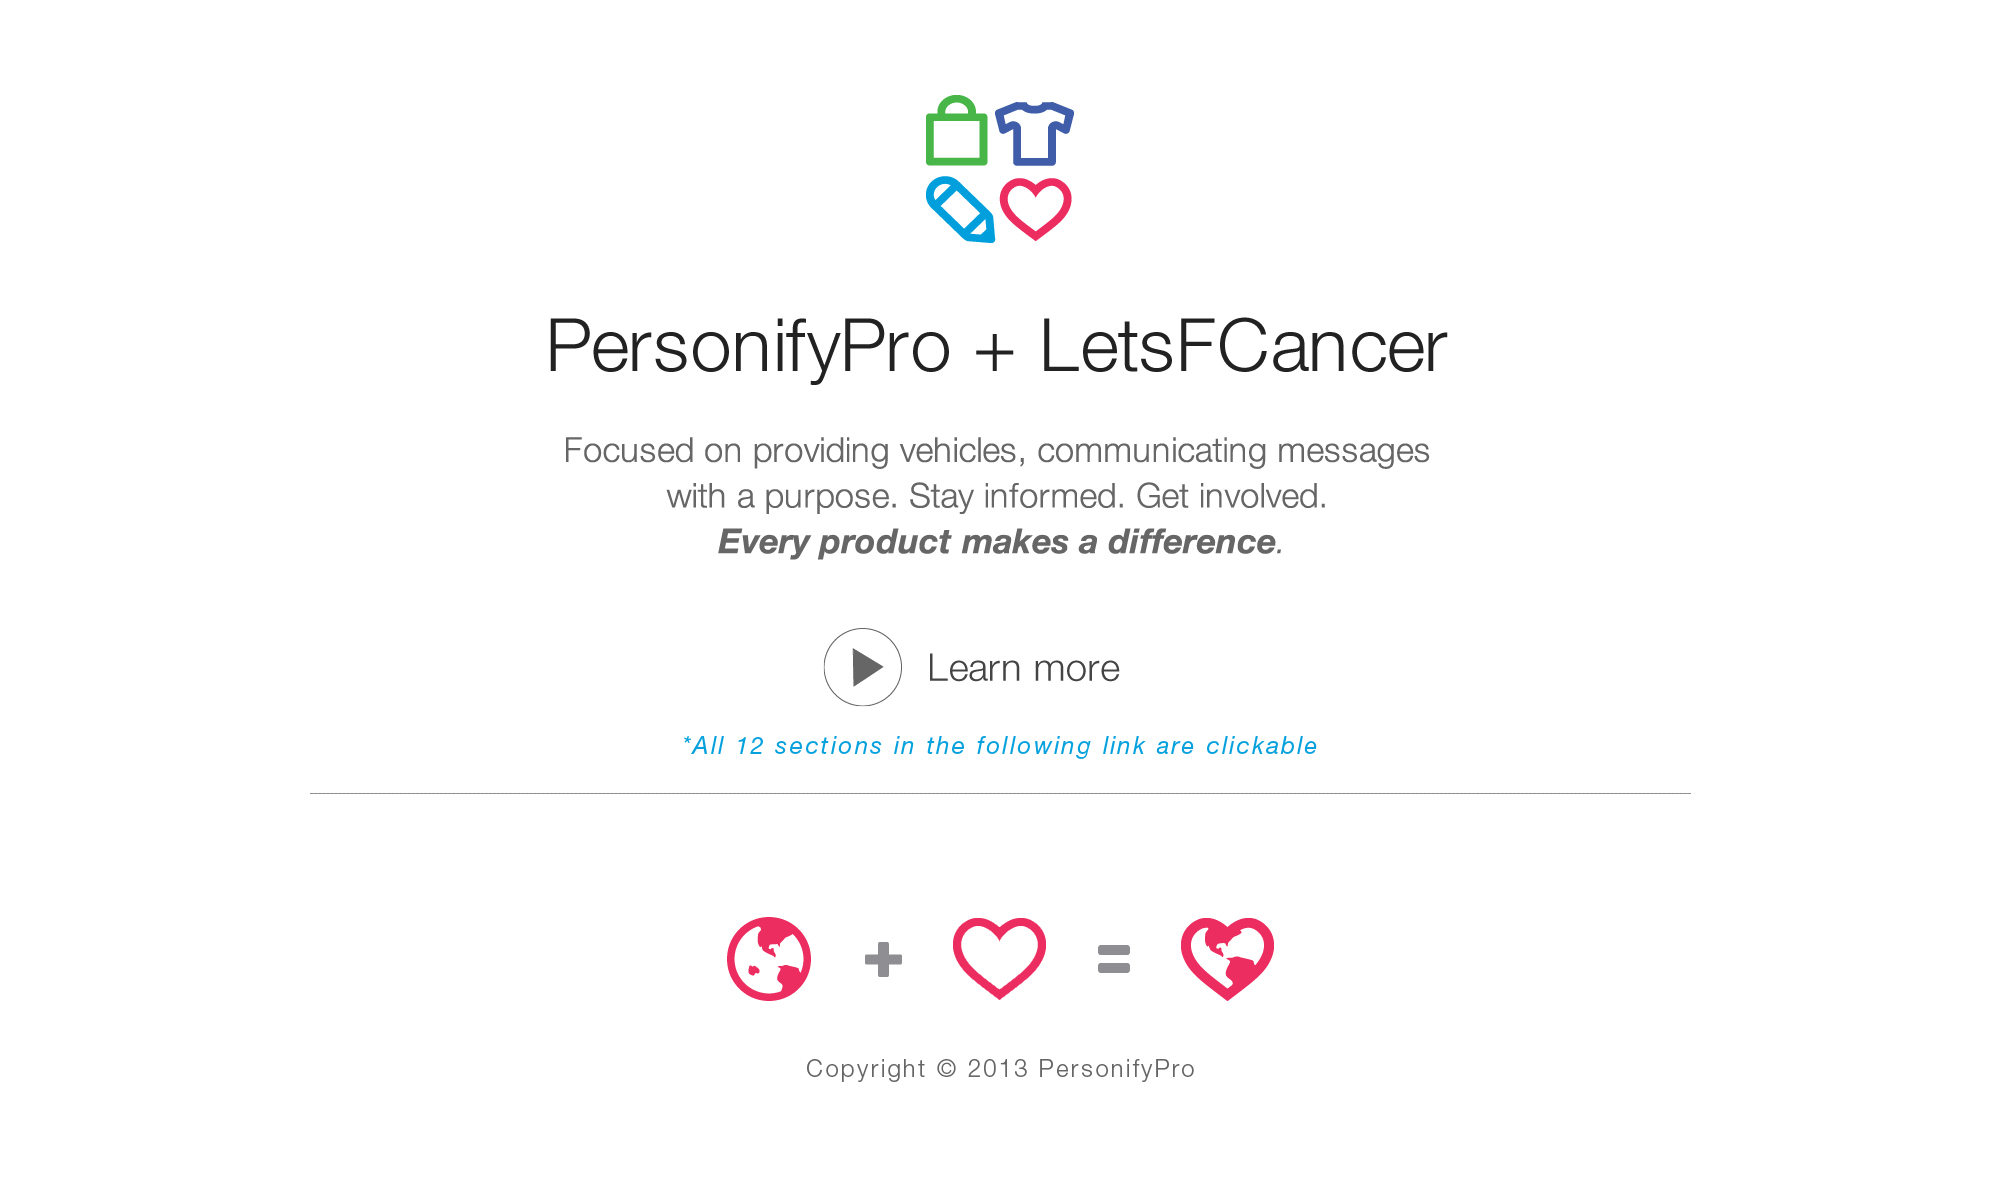 7--Personify+Letsfcancer